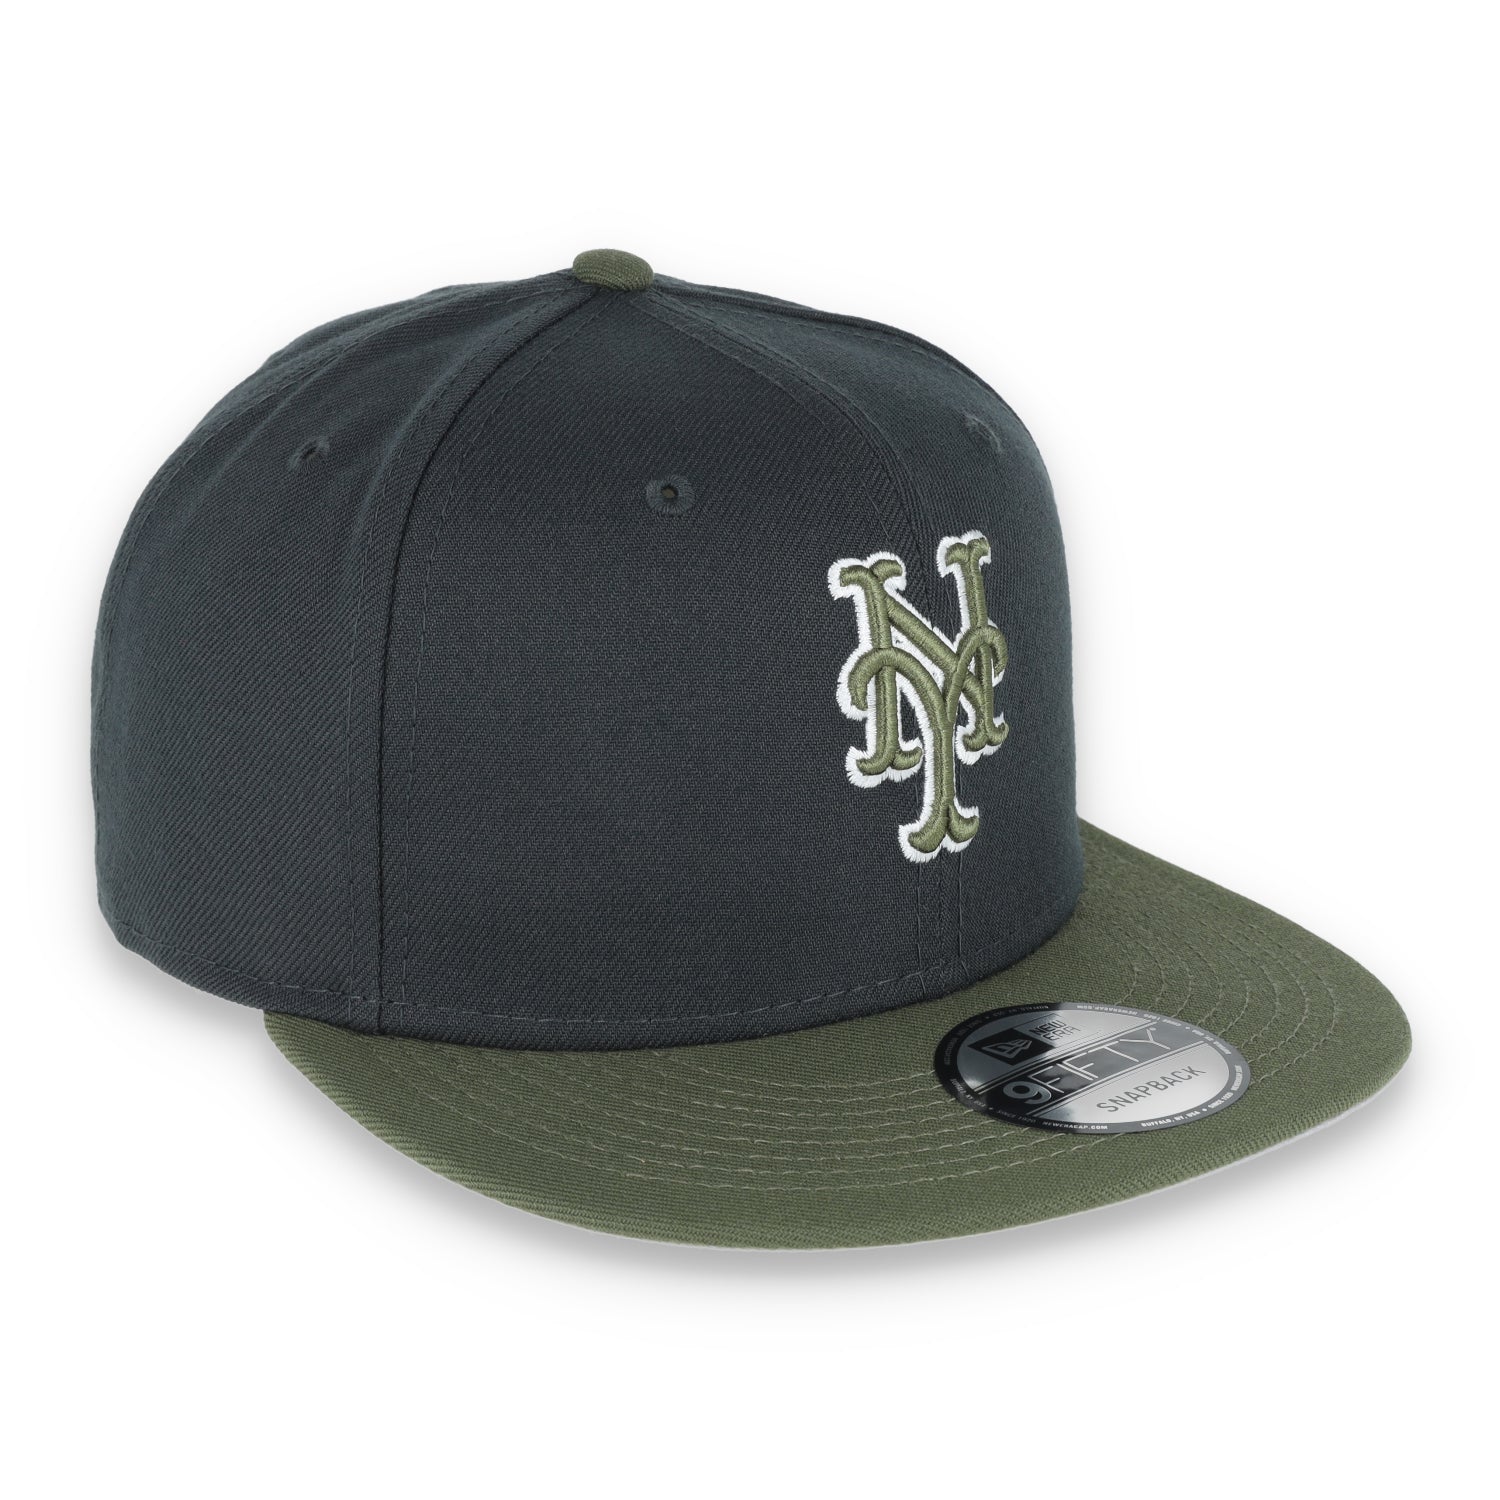 New Era New York Mets 2-Tone Color Pack 9FIFTY Snapback Hat- Grey/Olive